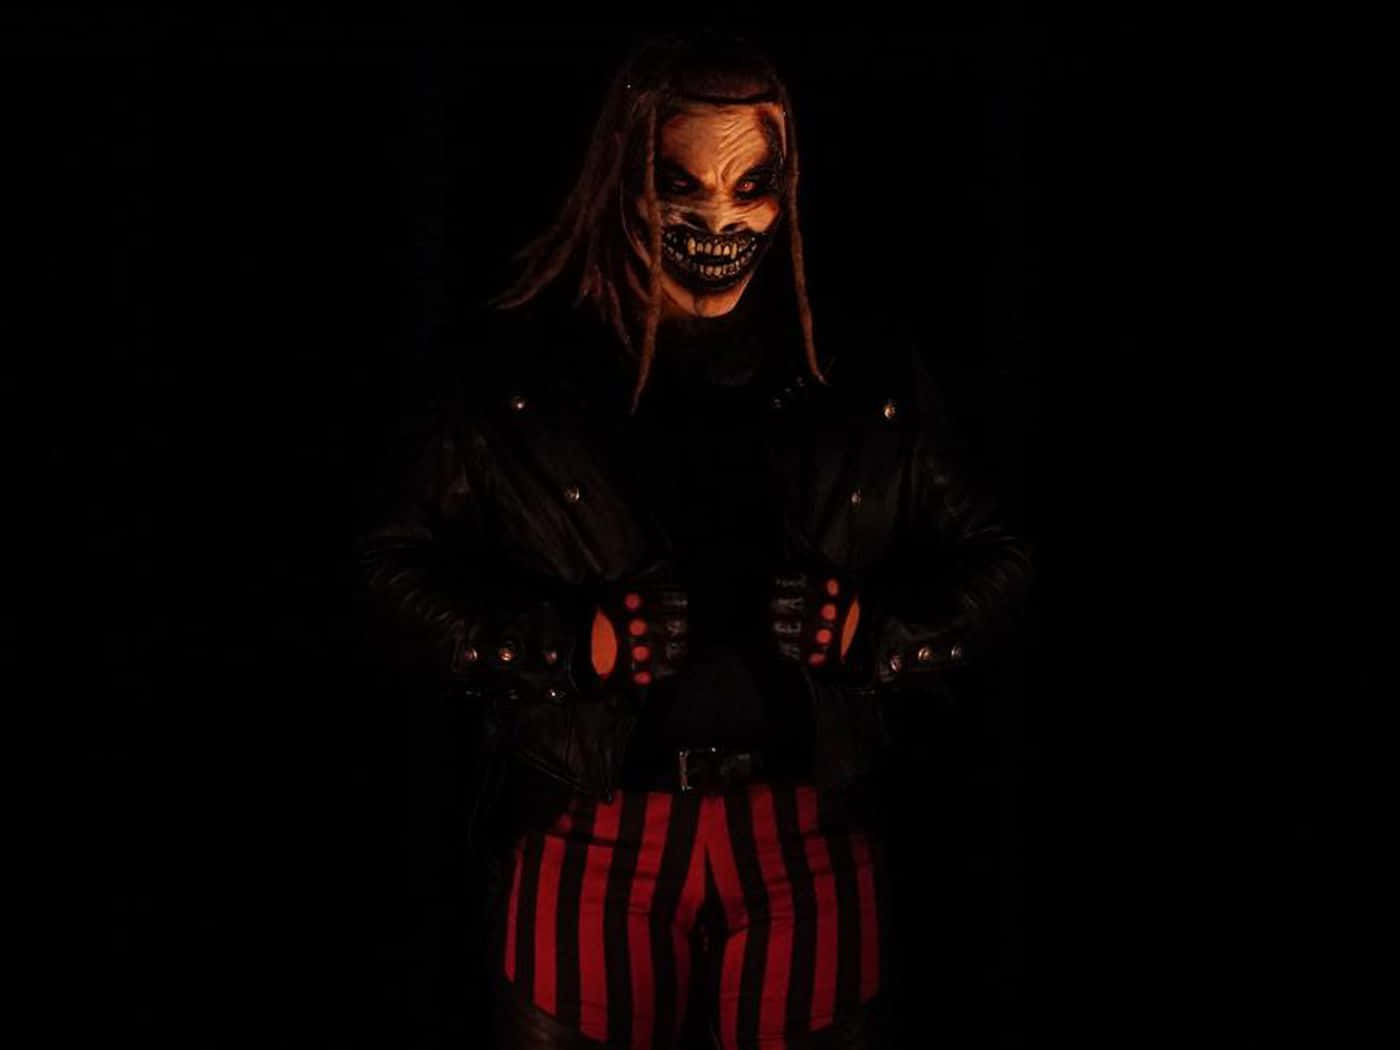 Bray Wyatt death: Who created The Fiend's mask? Find out his